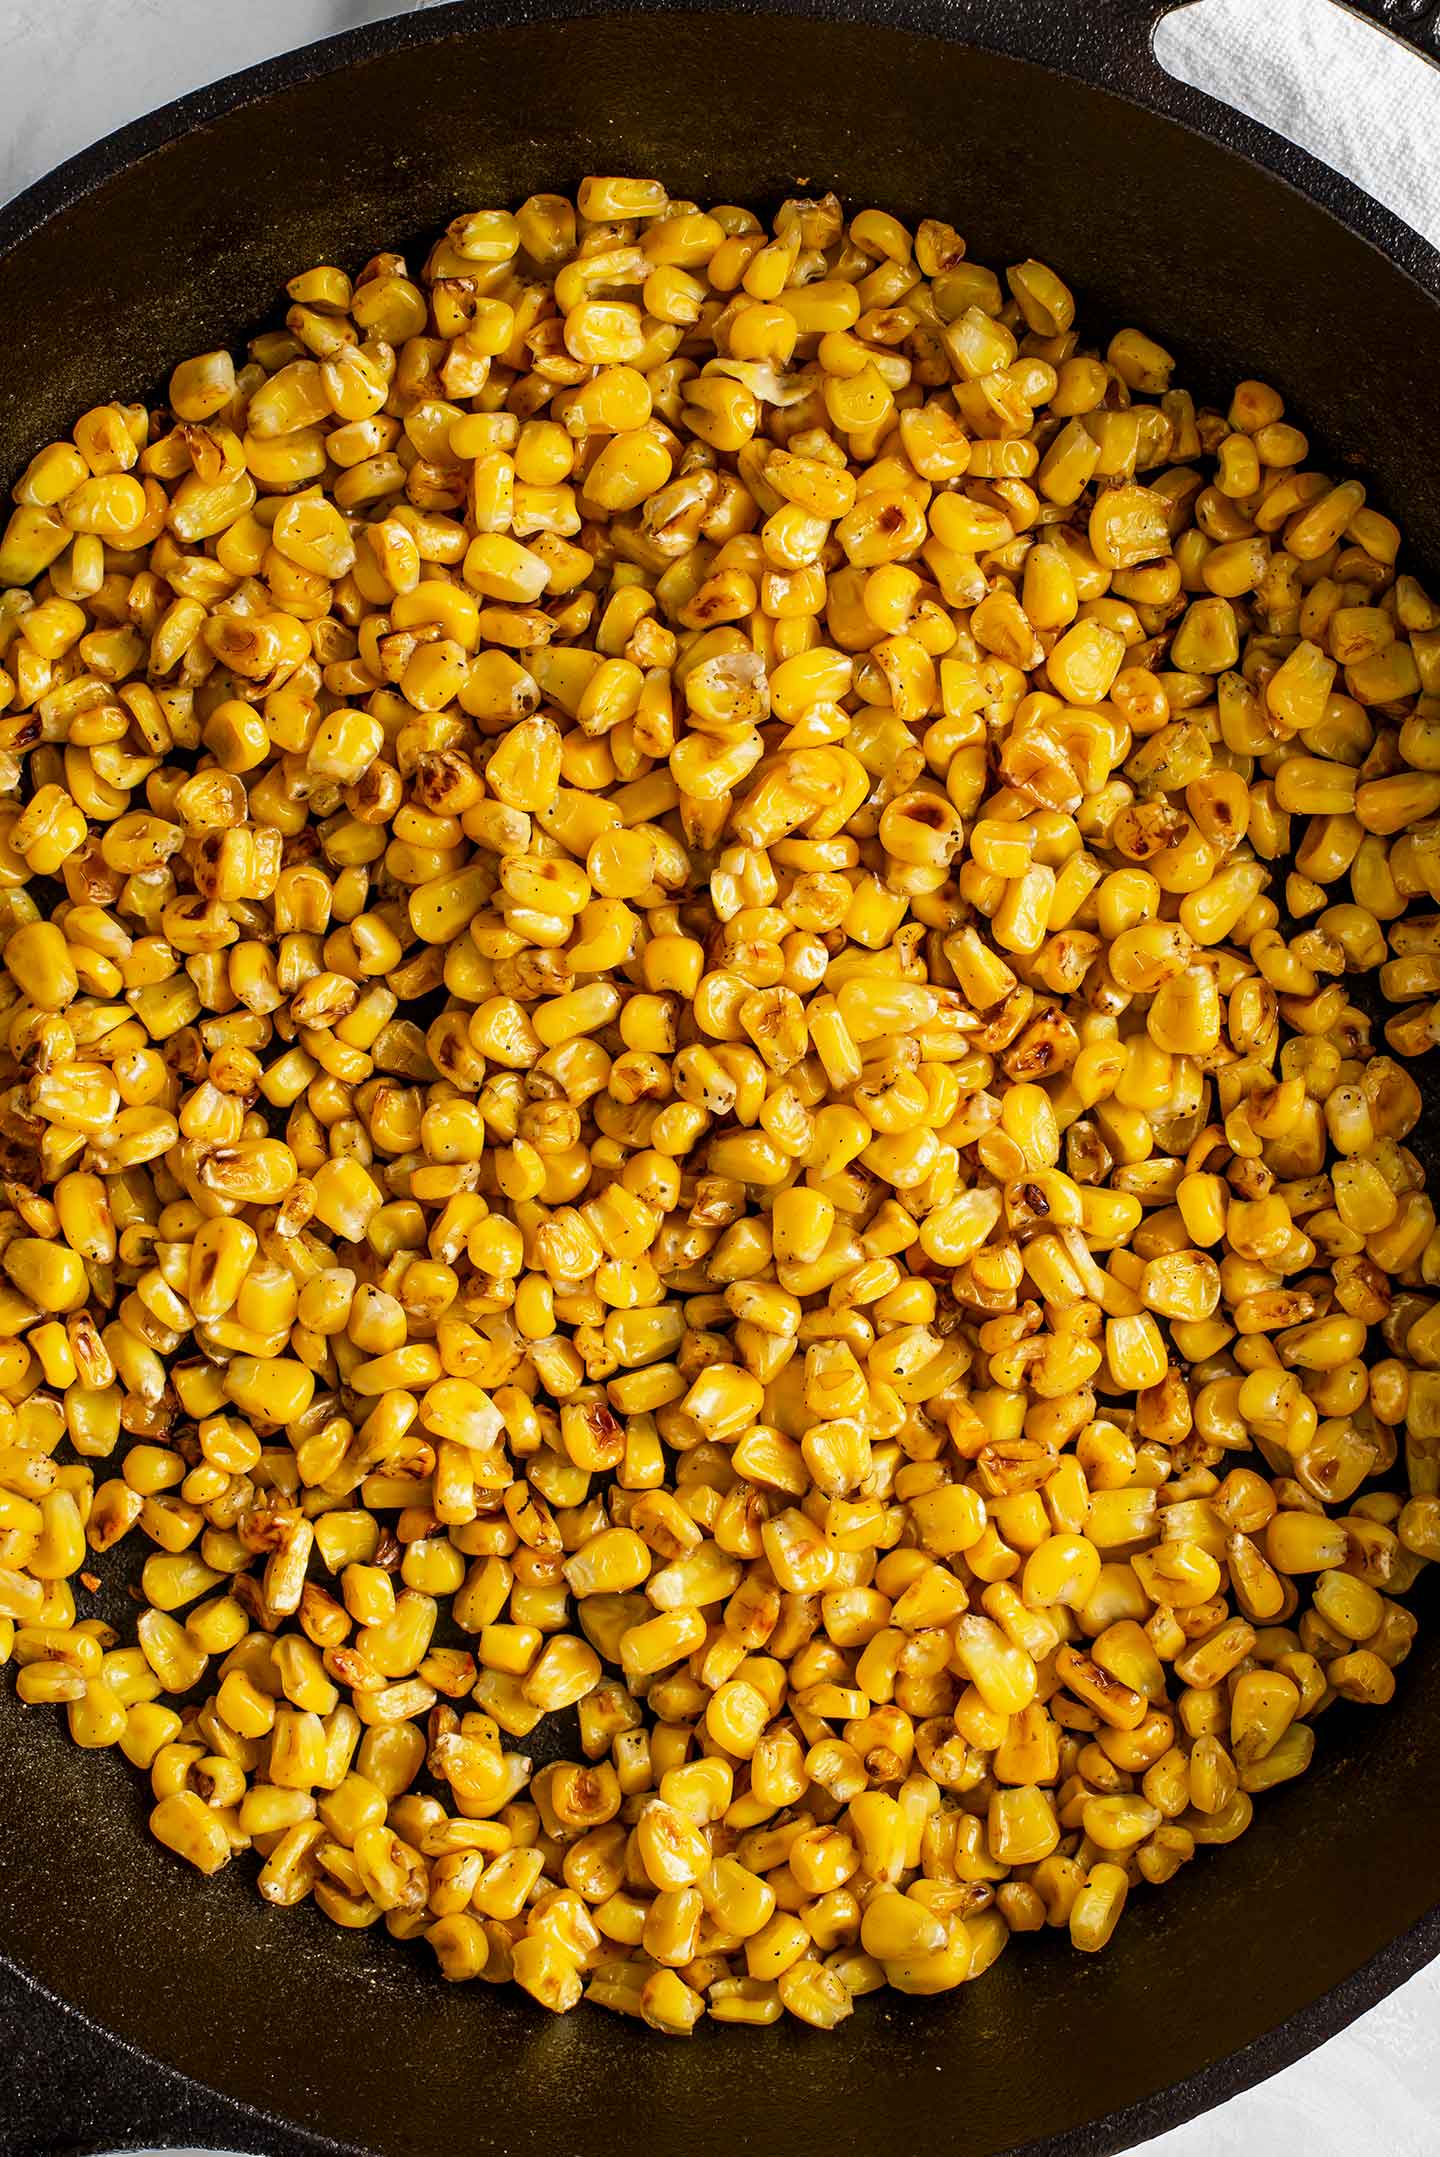 Top down view of blackened, charred corn in a cast iron skillet. The kernels are golden and darkened with browned bits.